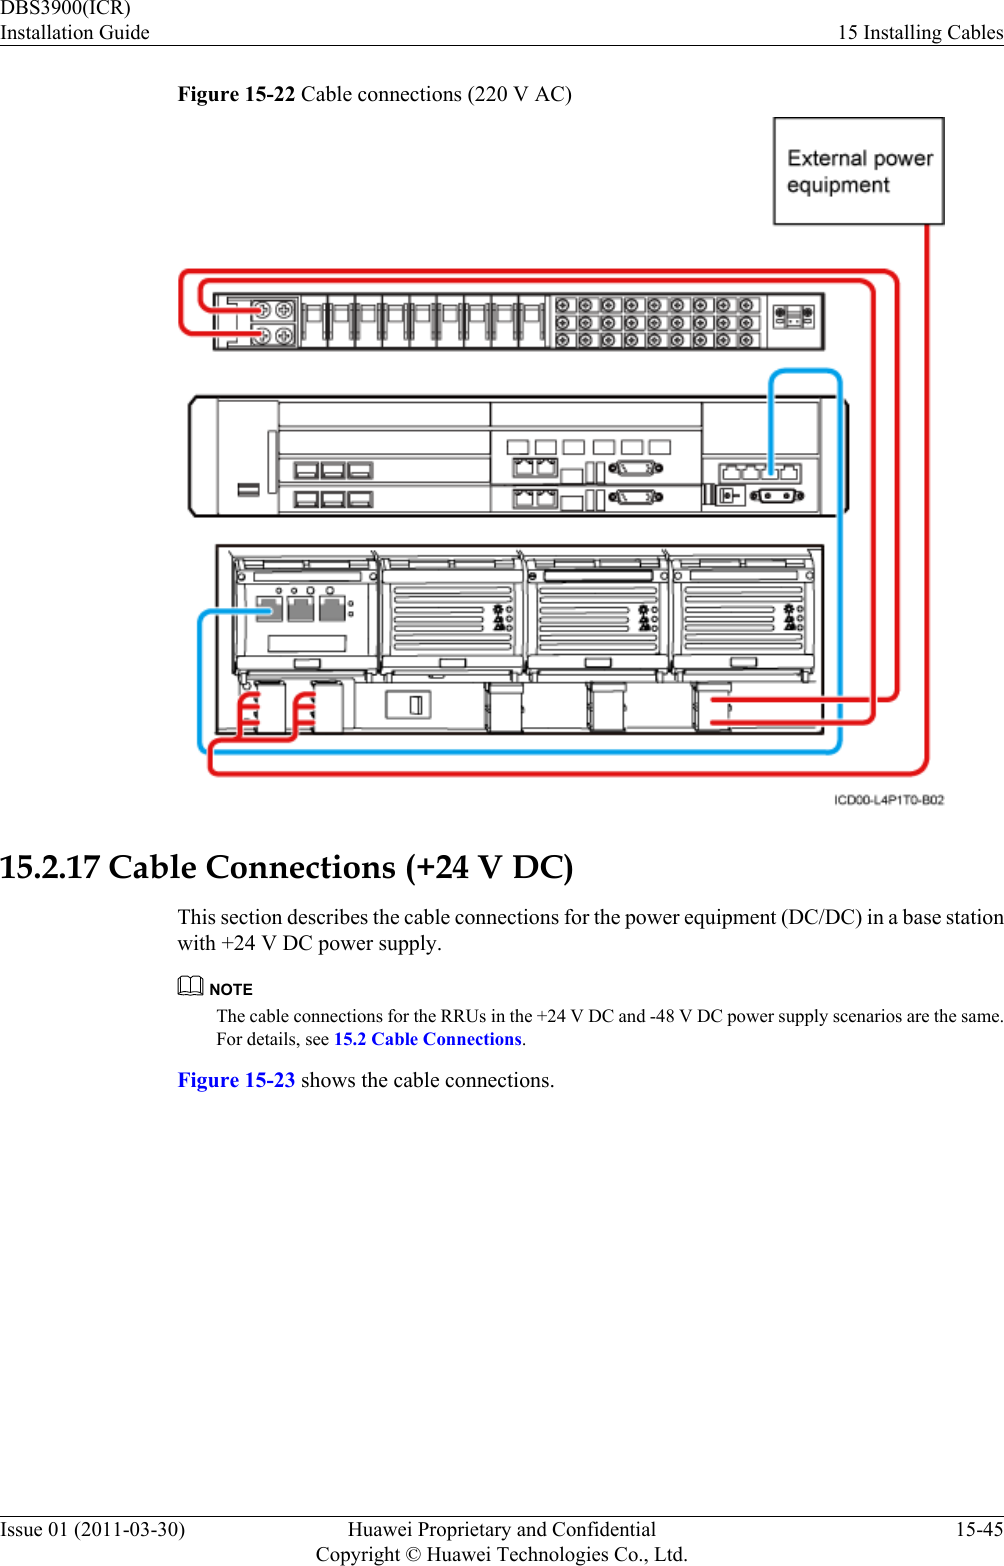 Figure 15-22 Cable connections (220 V AC)15.2.17 Cable Connections (+24 V DC)This section describes the cable connections for the power equipment (DC/DC) in a base stationwith +24 V DC power supply.NOTEThe cable connections for the RRUs in the +24 V DC and -48 V DC power supply scenarios are the same.For details, see 15.2 Cable Connections.Figure 15-23 shows the cable connections.DBS3900(ICR)Installation Guide 15 Installing CablesIssue 01 (2011-03-30) Huawei Proprietary and ConfidentialCopyright © Huawei Technologies Co., Ltd.15-45